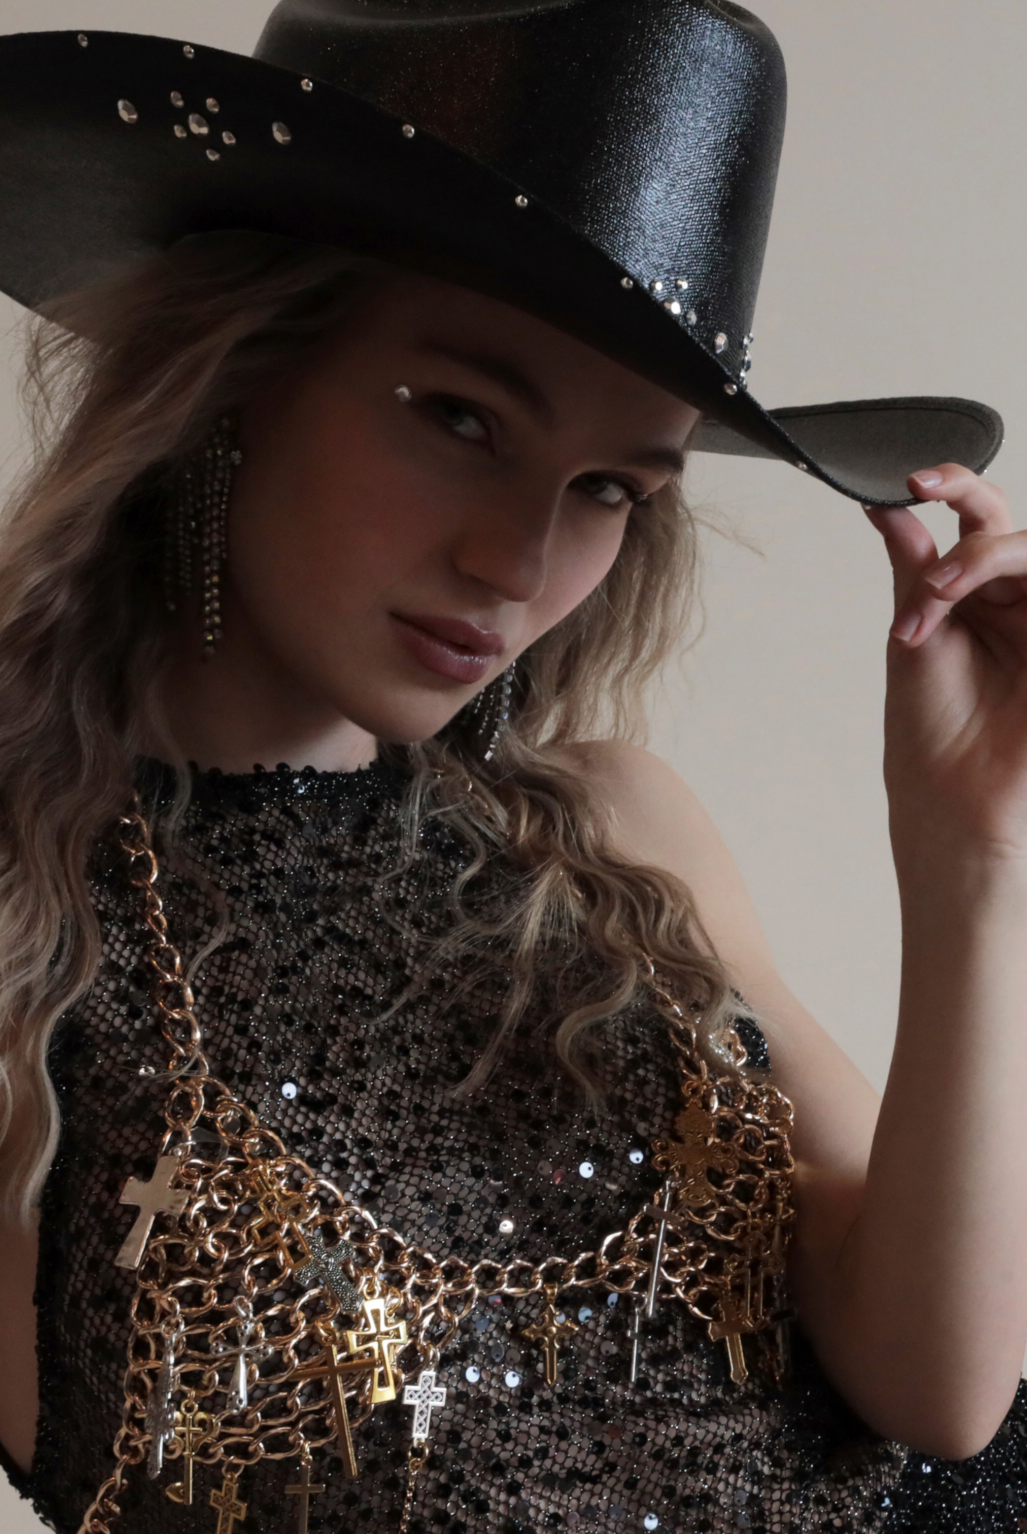 Black cowboy hat with metallic jewels paired with gold chain bra and black sequin dress.